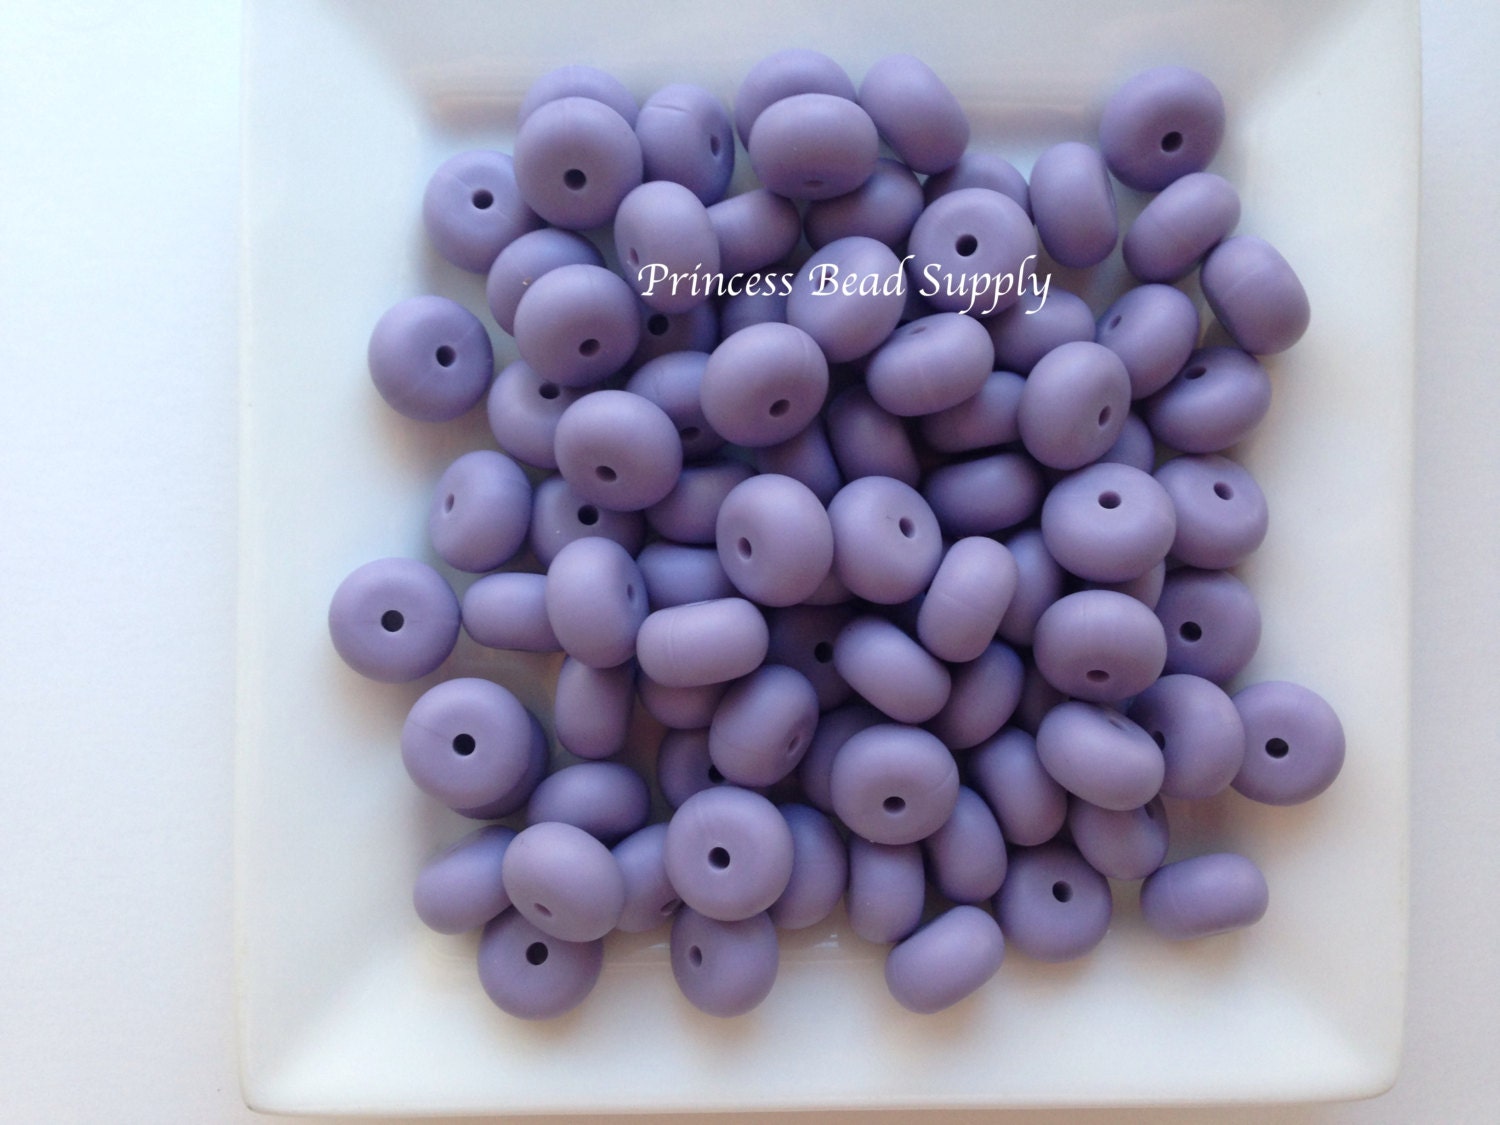 500 BULK 15mm Silicone Beads, 500 Silicone Beads Wholesale, 100